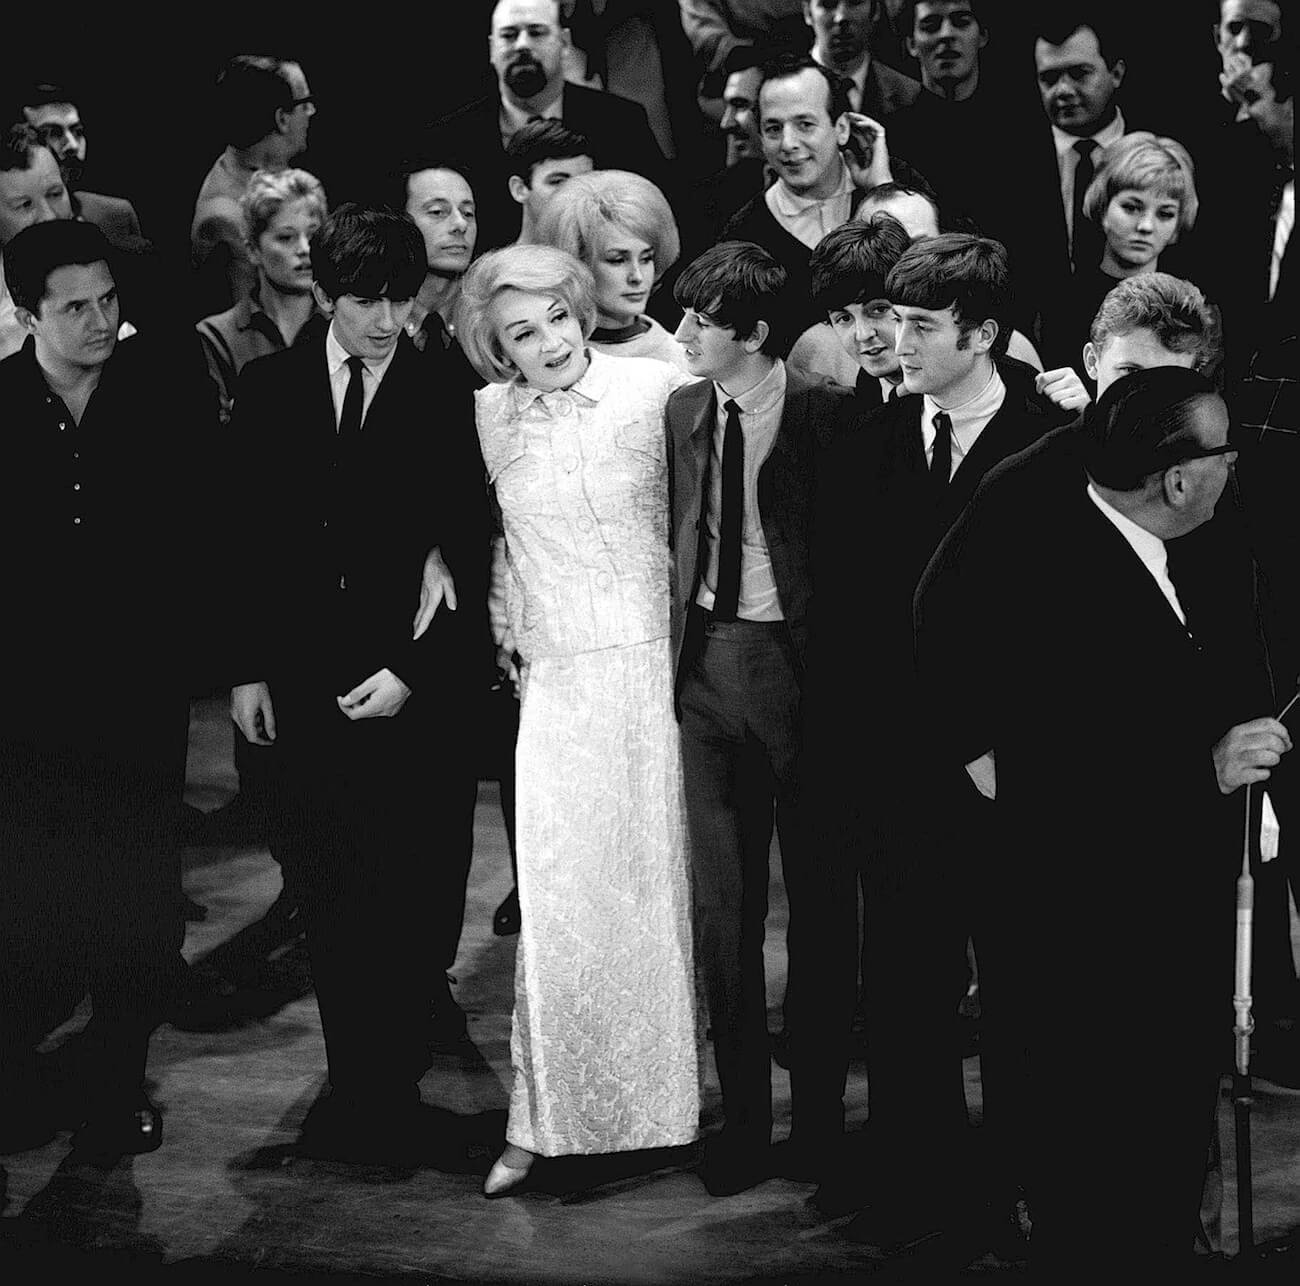 The Beatles with Marlene Dietrich at the Royal Variety Performance in 1963.